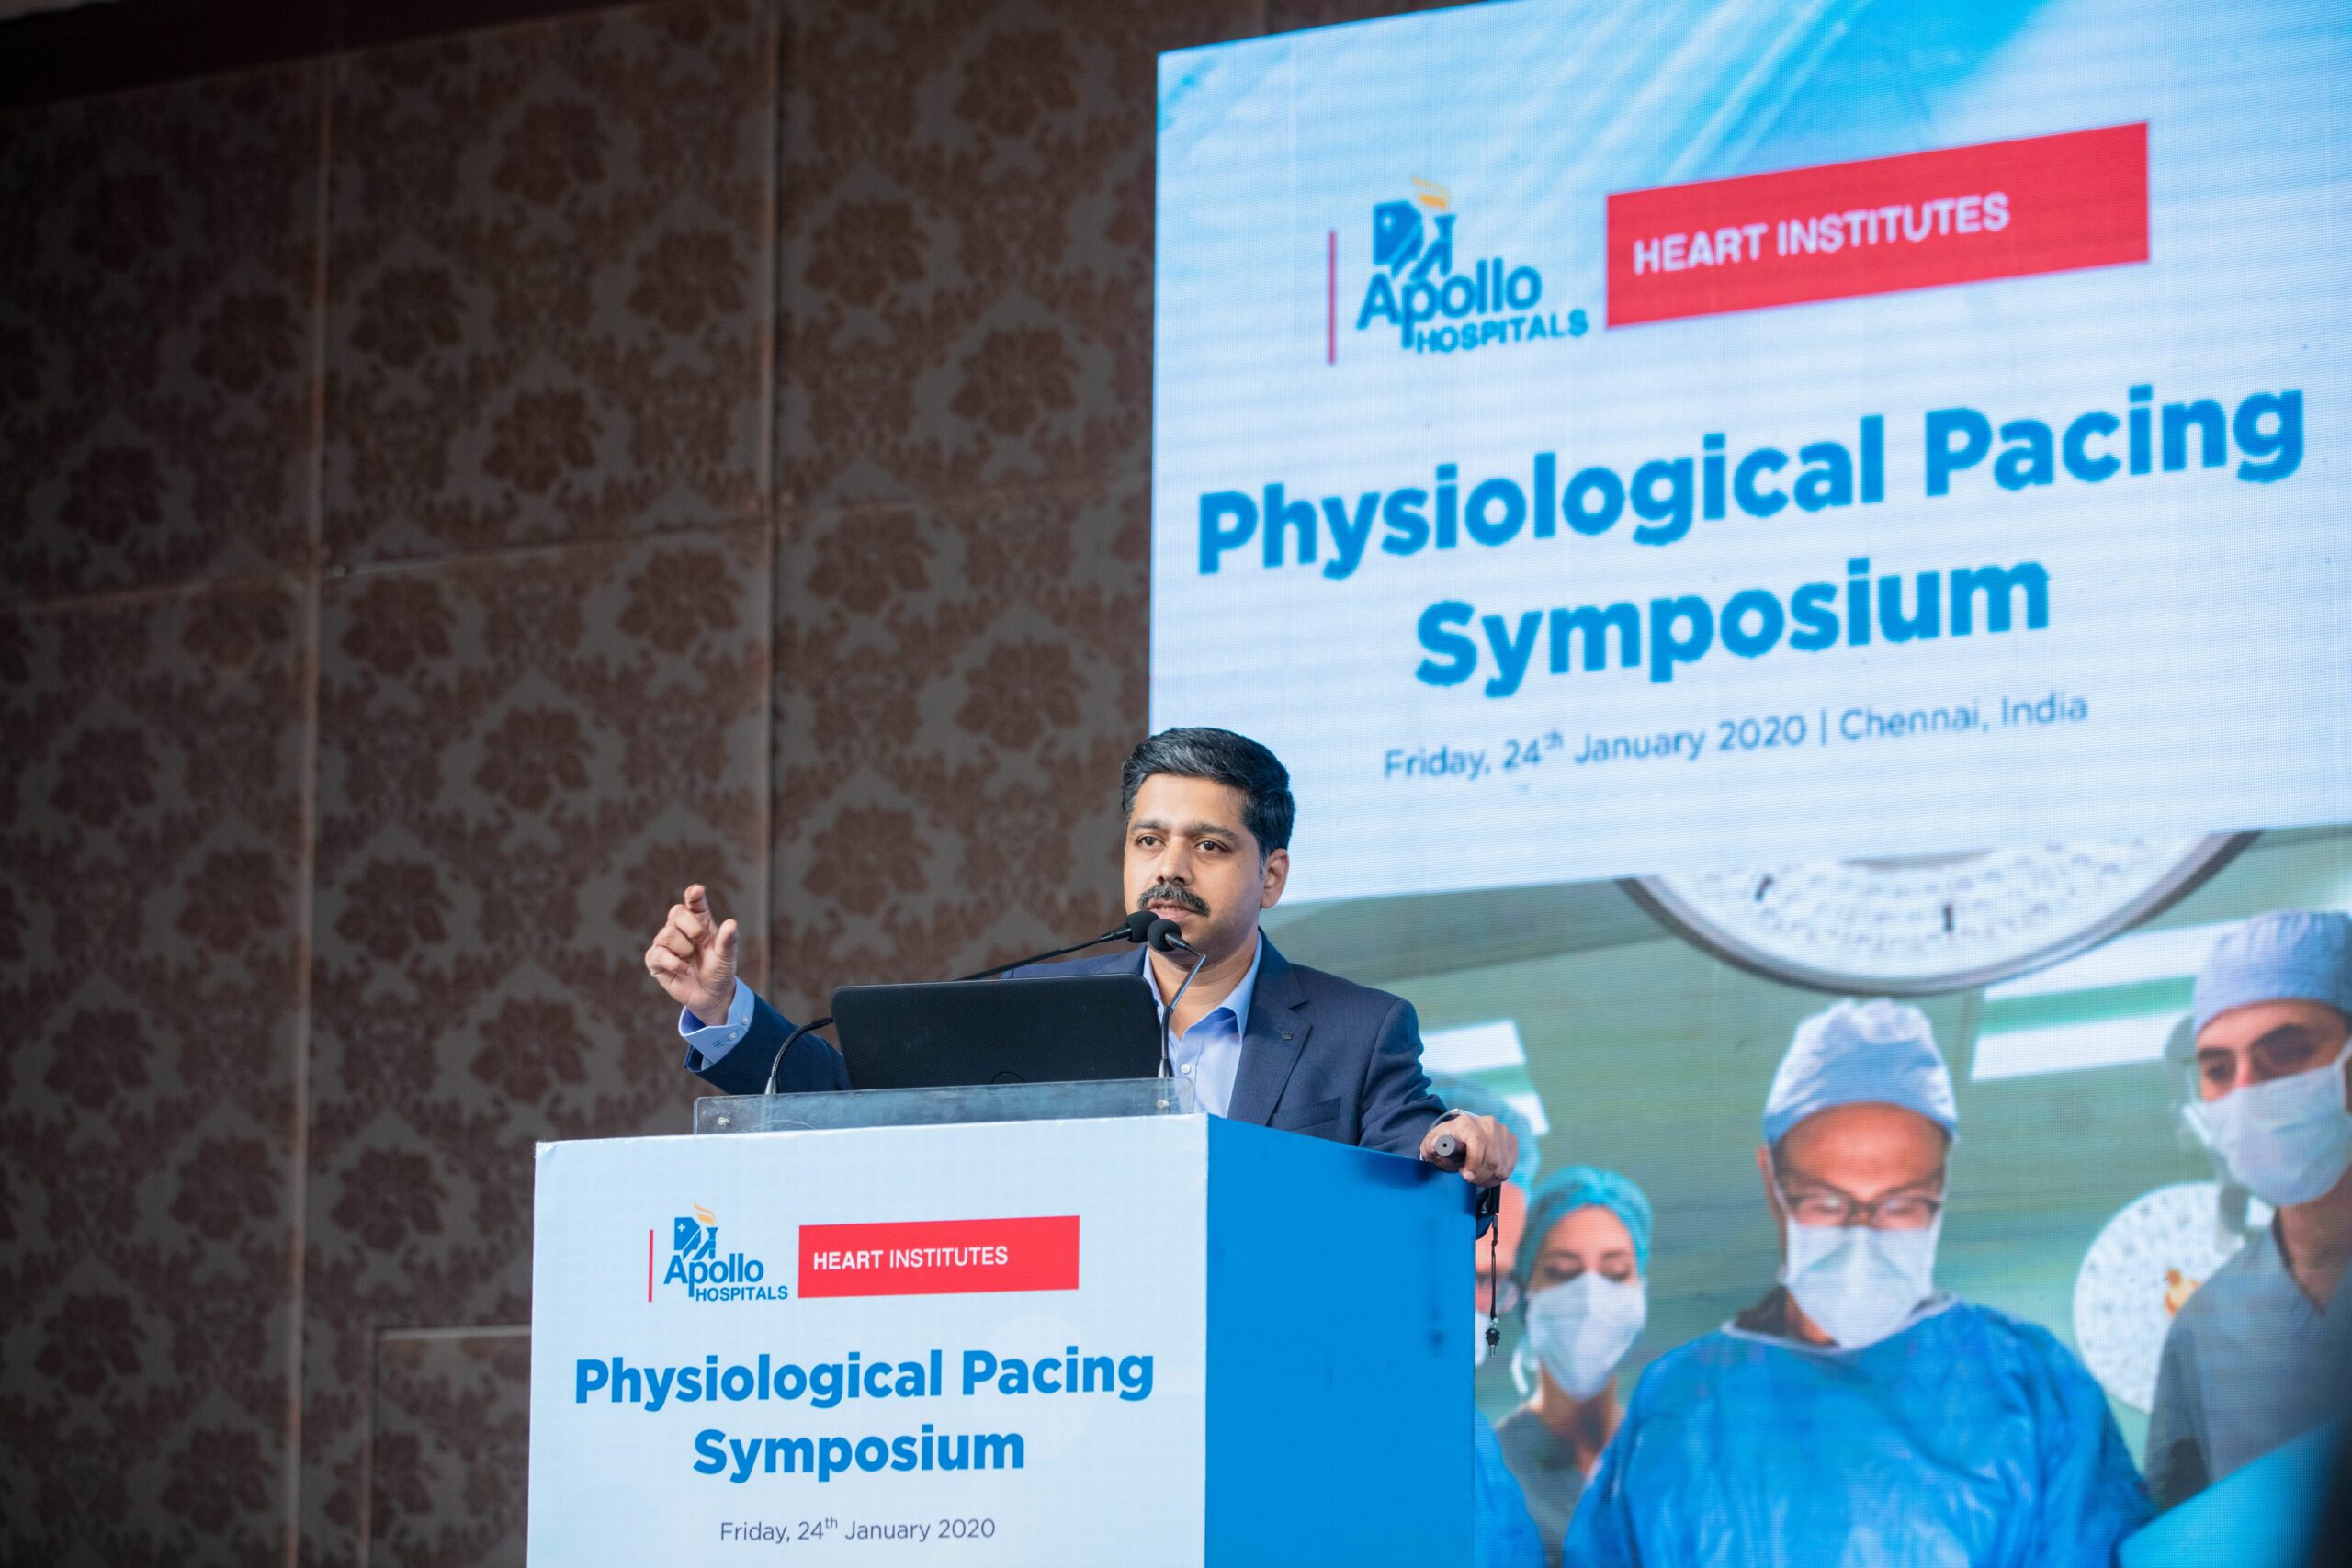 Photo of Dr. Karthigesan A.M. addressing a gathering at the Physiological Pacing Symposium.